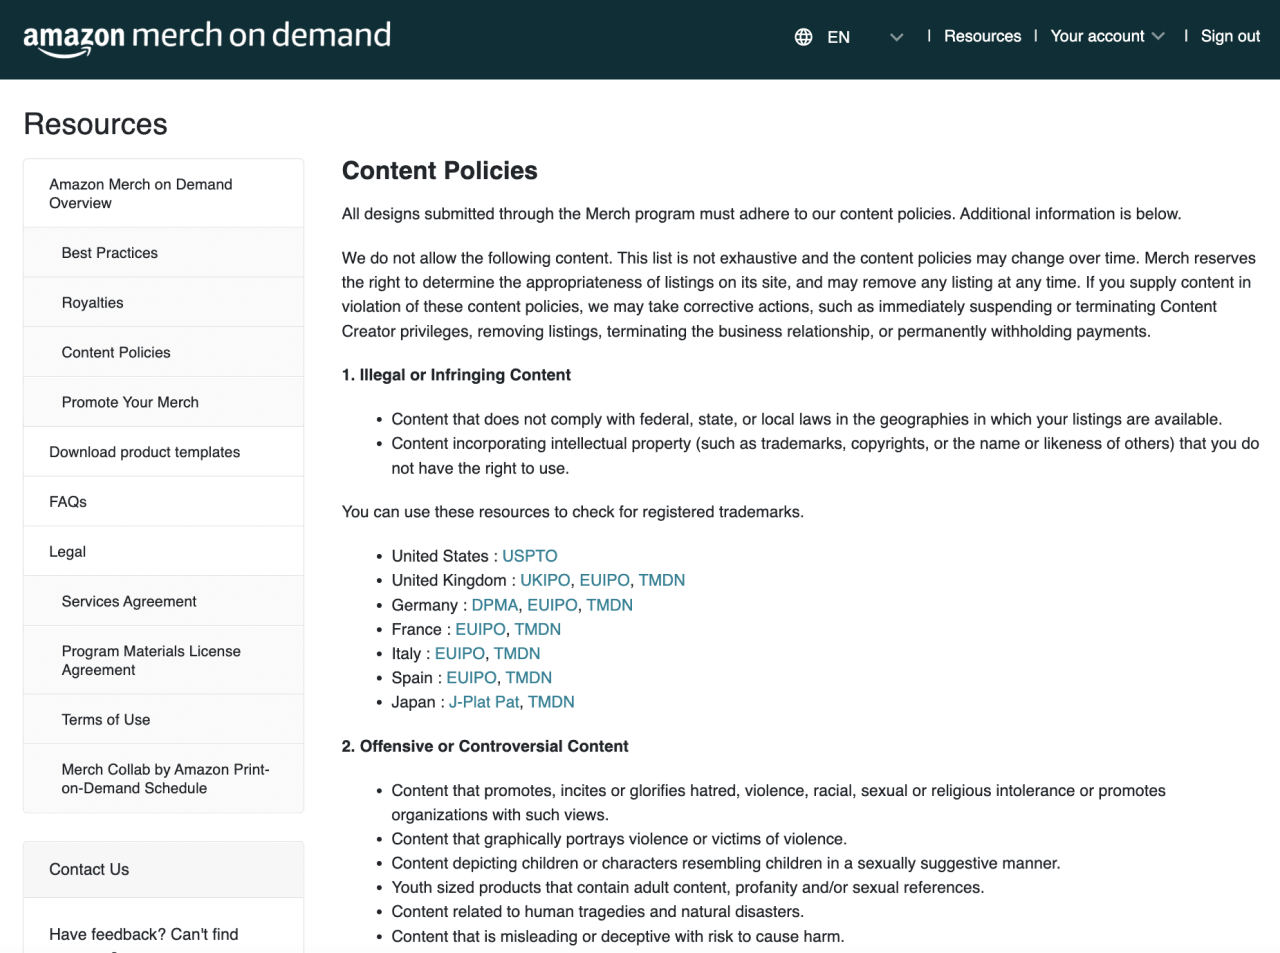 A screenshot of the Amazon Merch on Demand content policies page